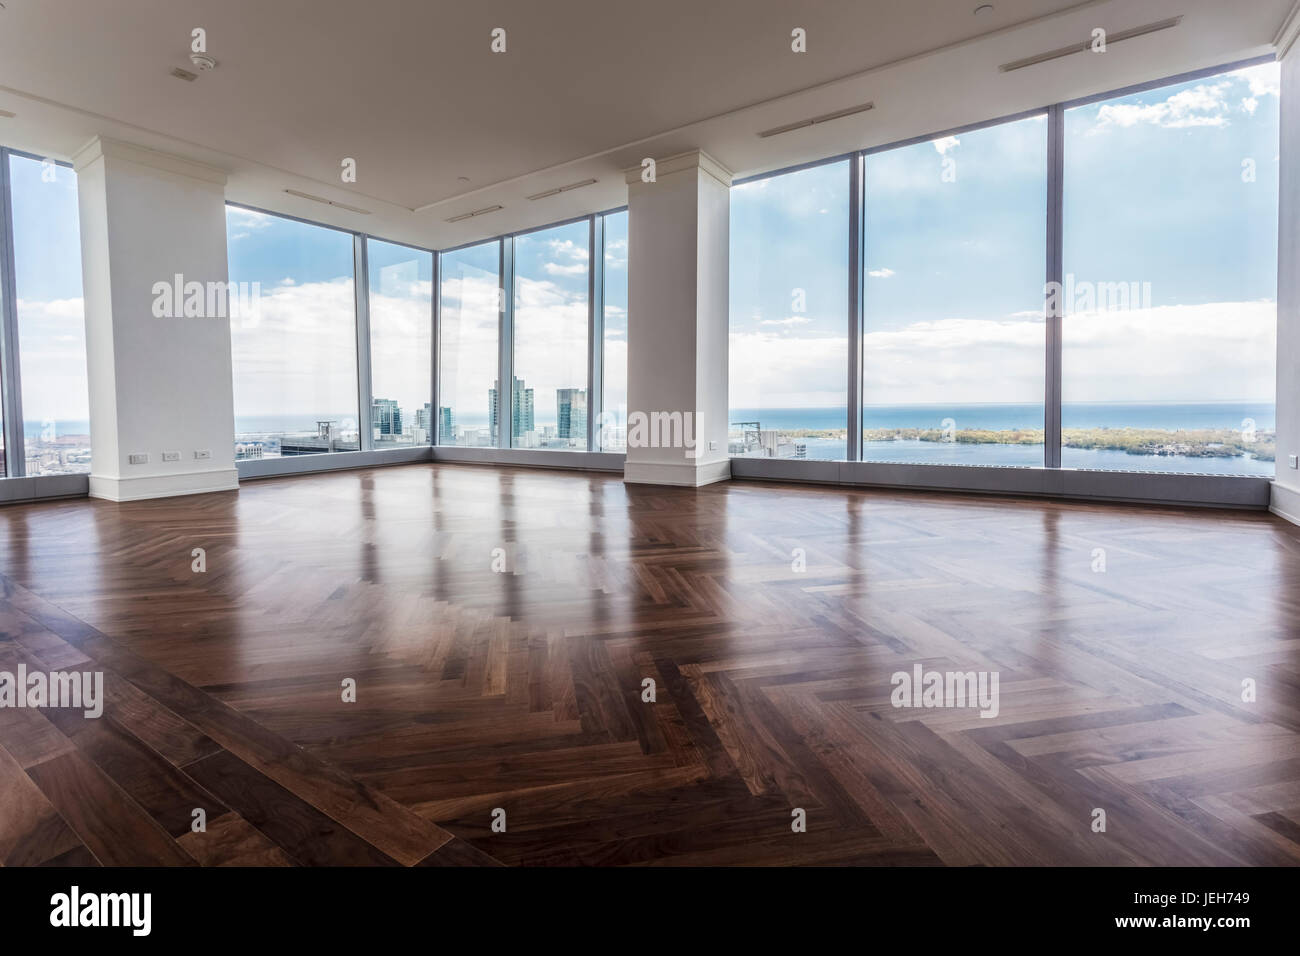 New Hardwood Flooring In An Apartment With Floor To Ceiling